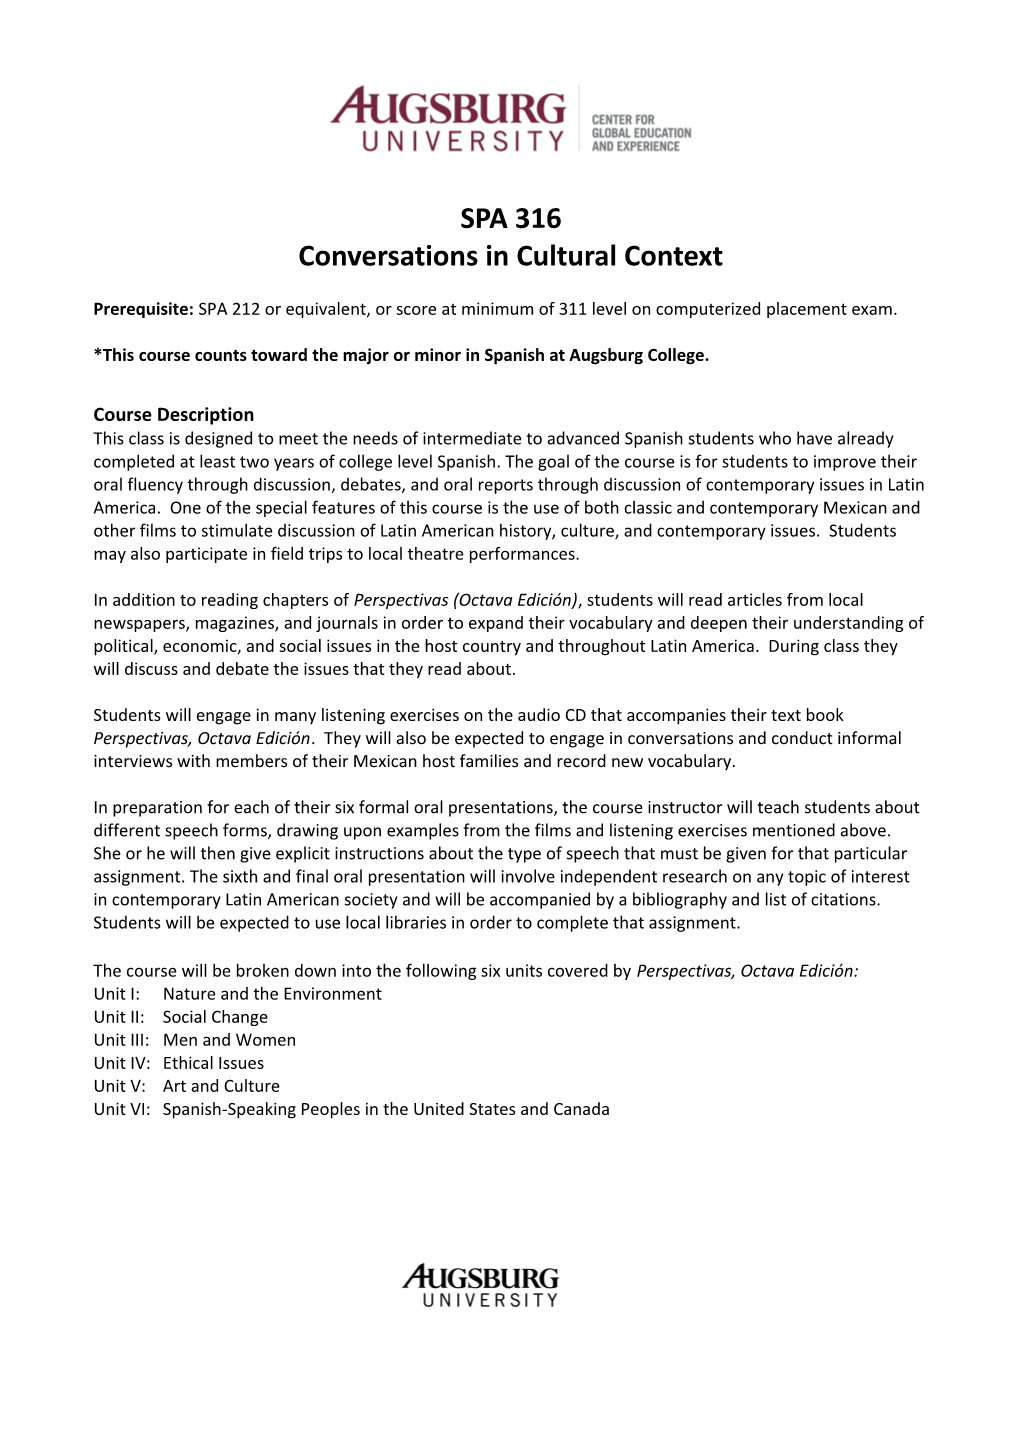 Syllabus for SPA 316: Conversations in Cultural Context